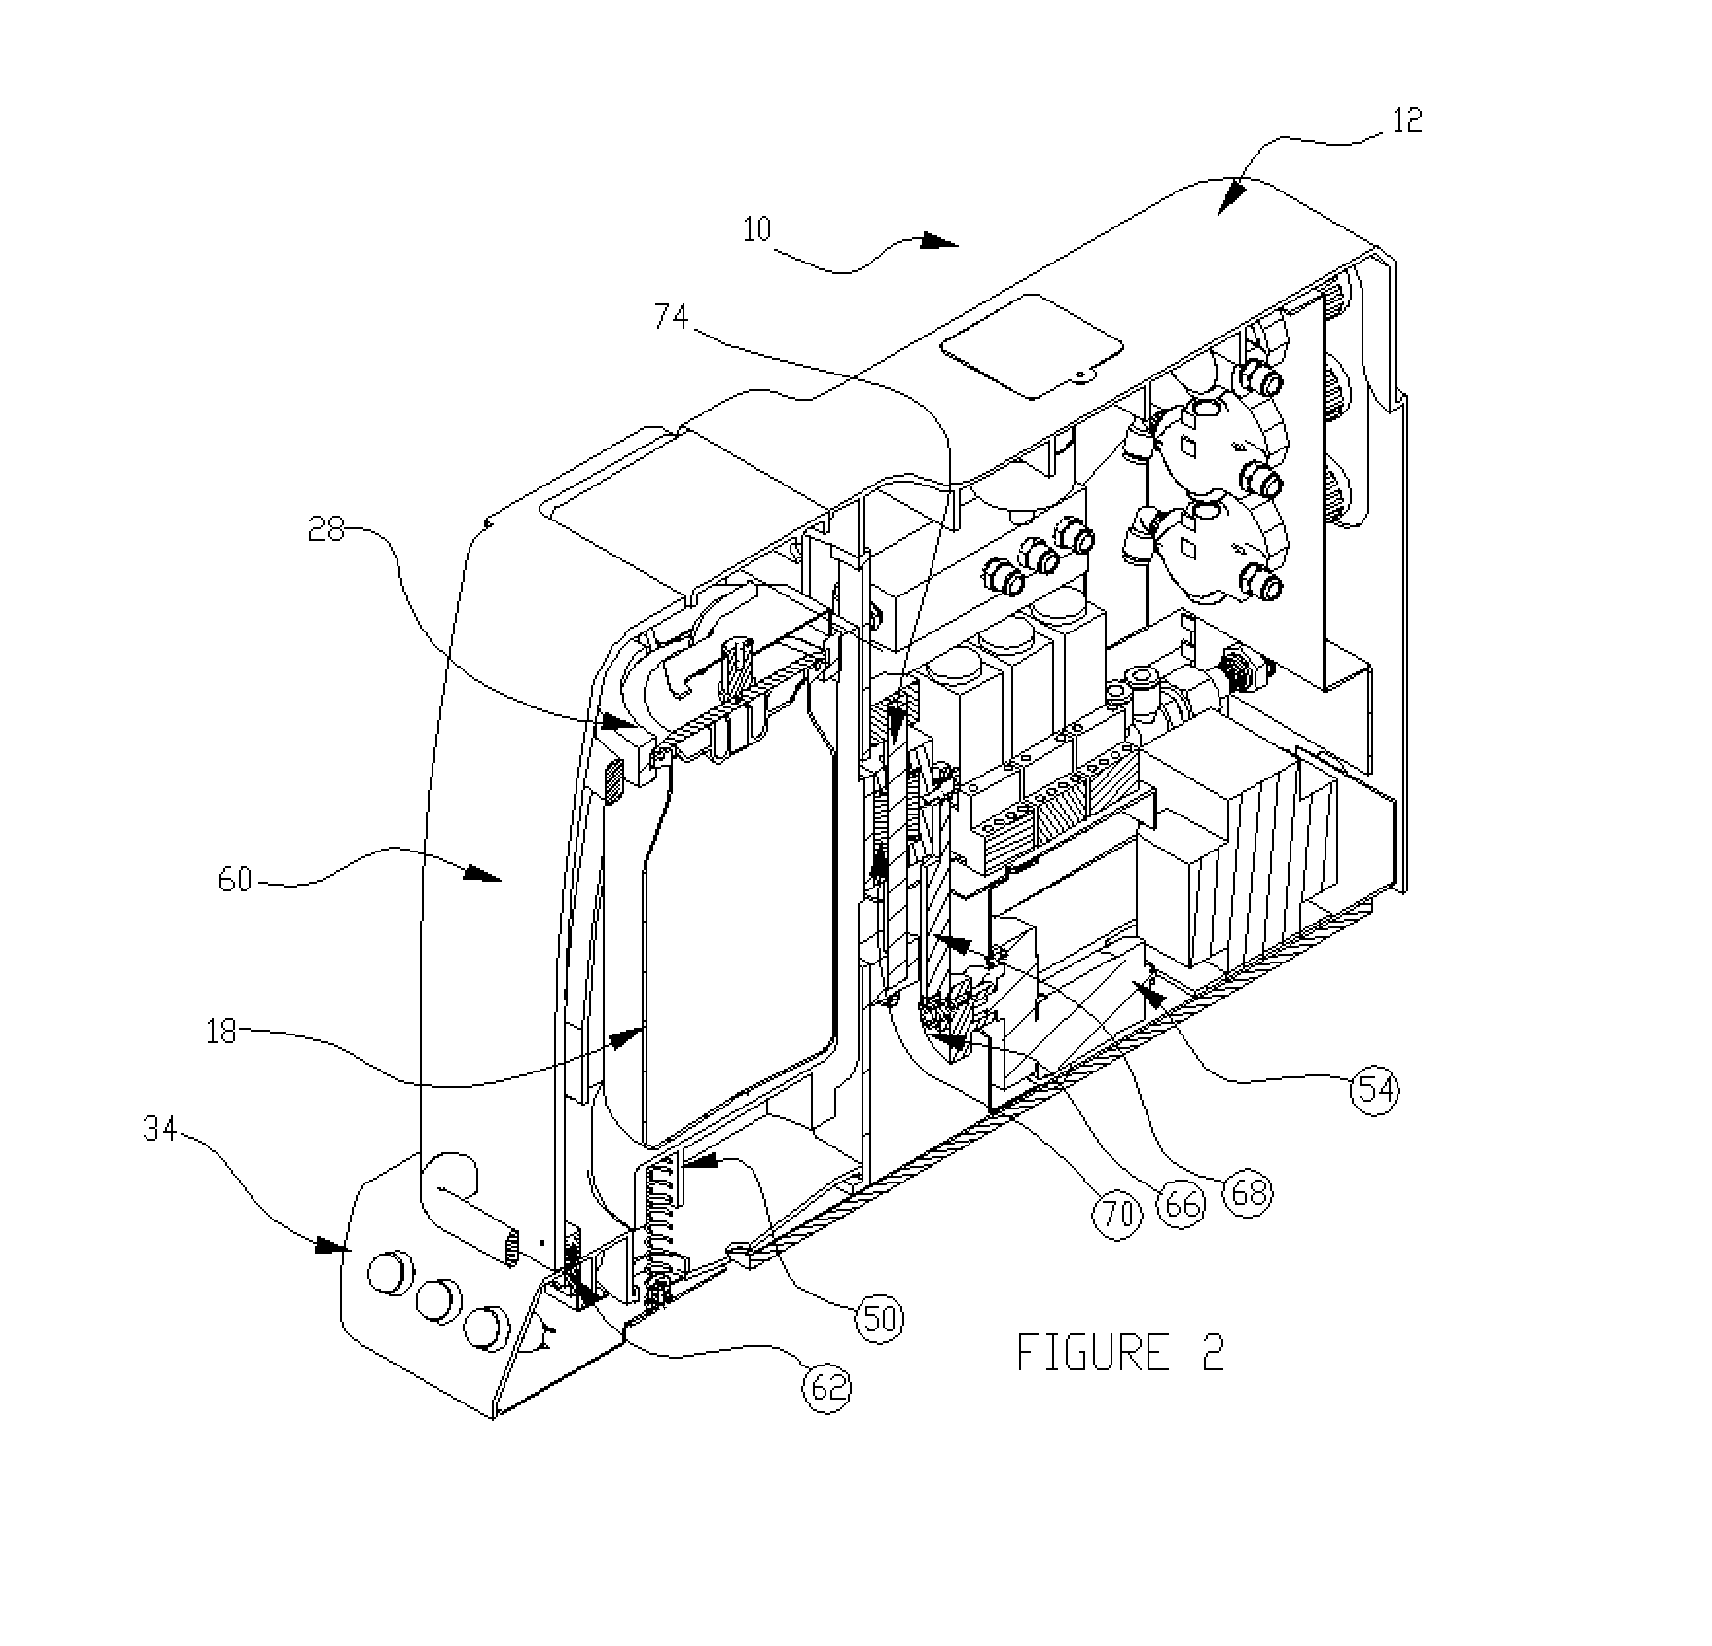 Batch carbonator and method of forming a carbonated beverage